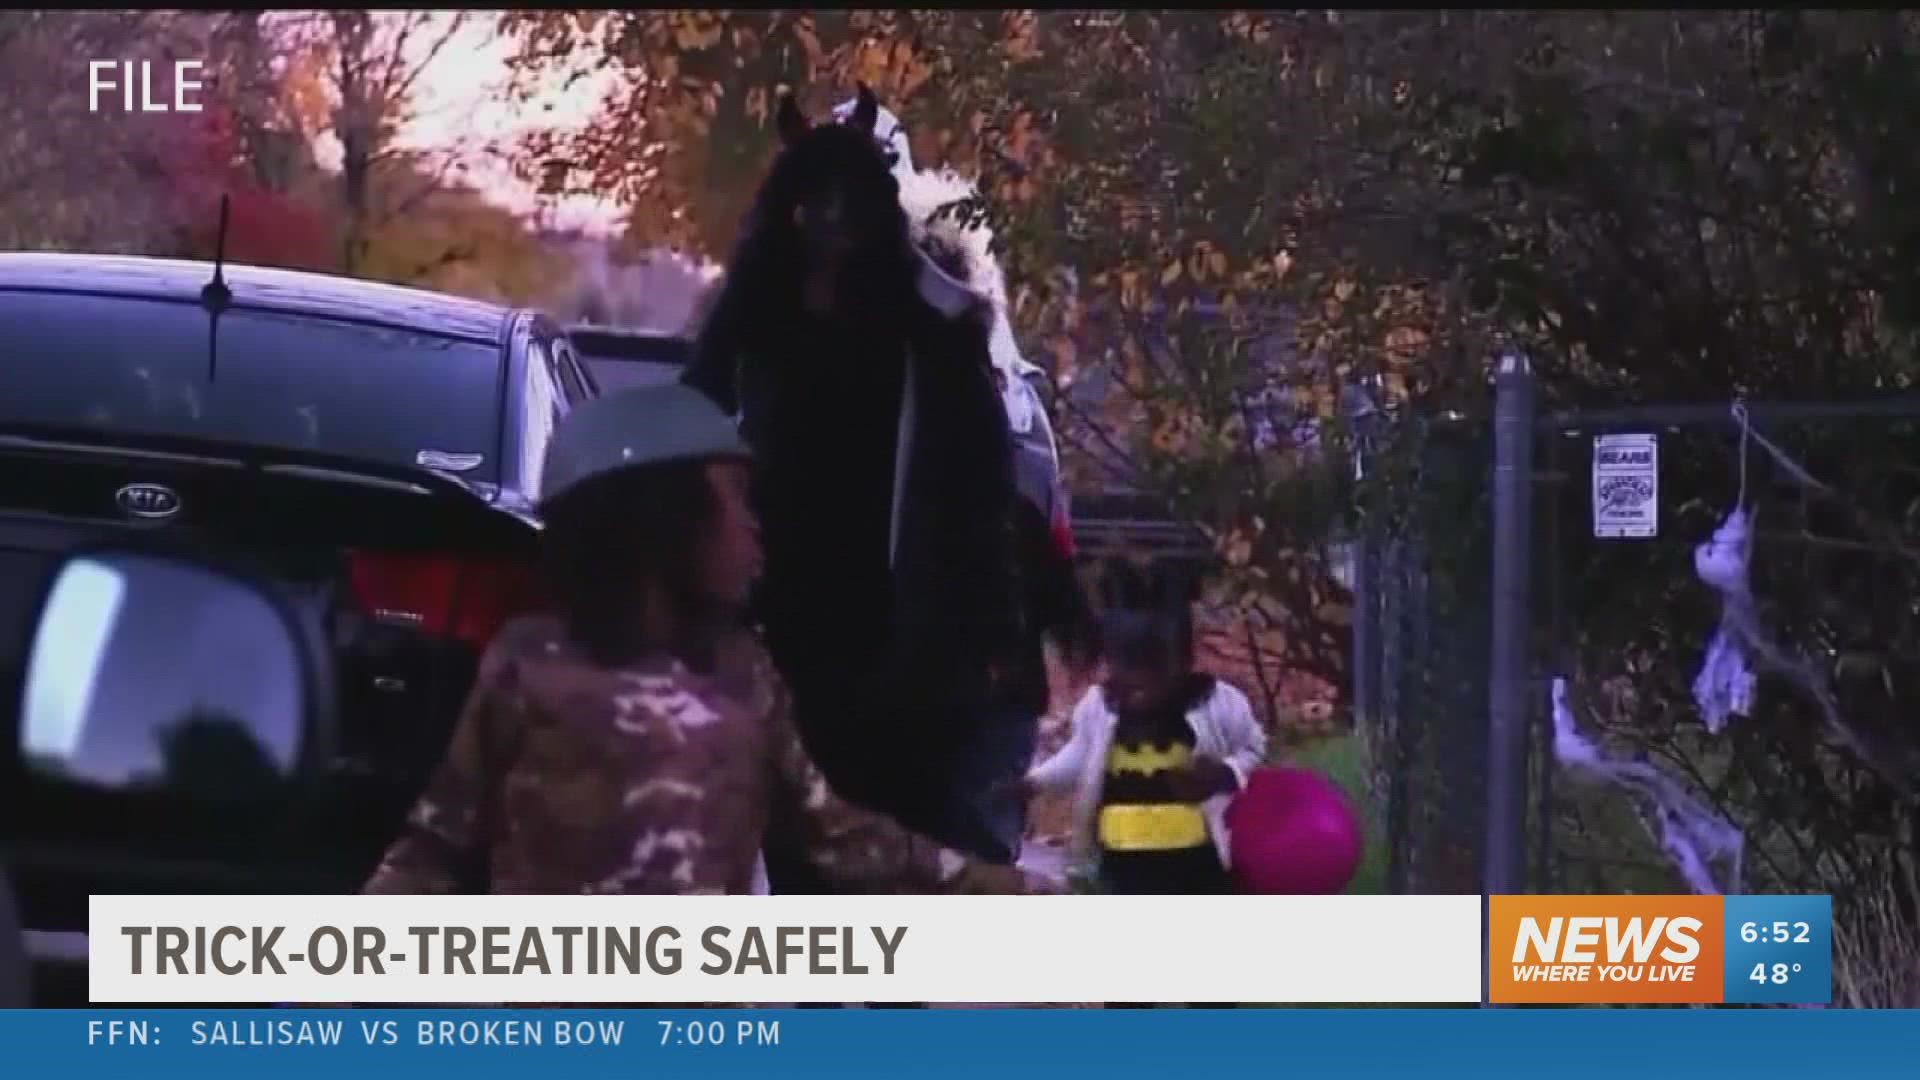 Officials are giving tips on how you and your kids can stay safe while trick-or-treating this Halloween.